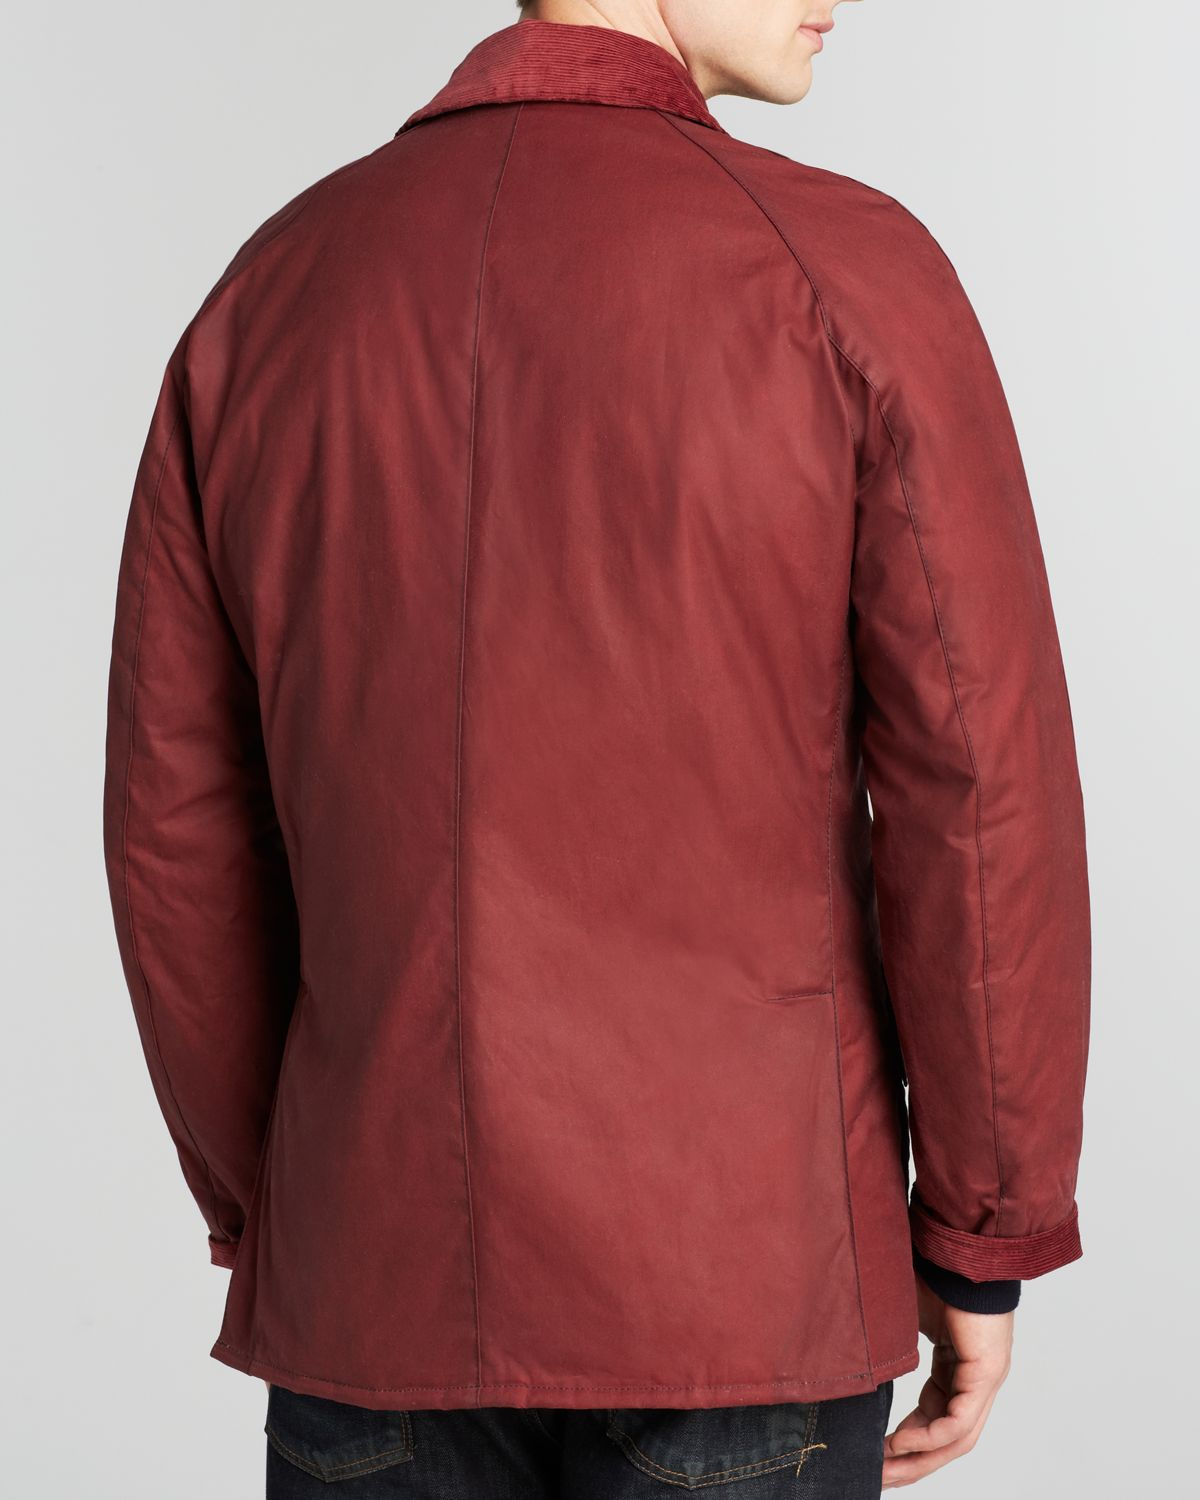 Barbour Ashtone Waxed Cotton Jacket in Red for Men - Lyst